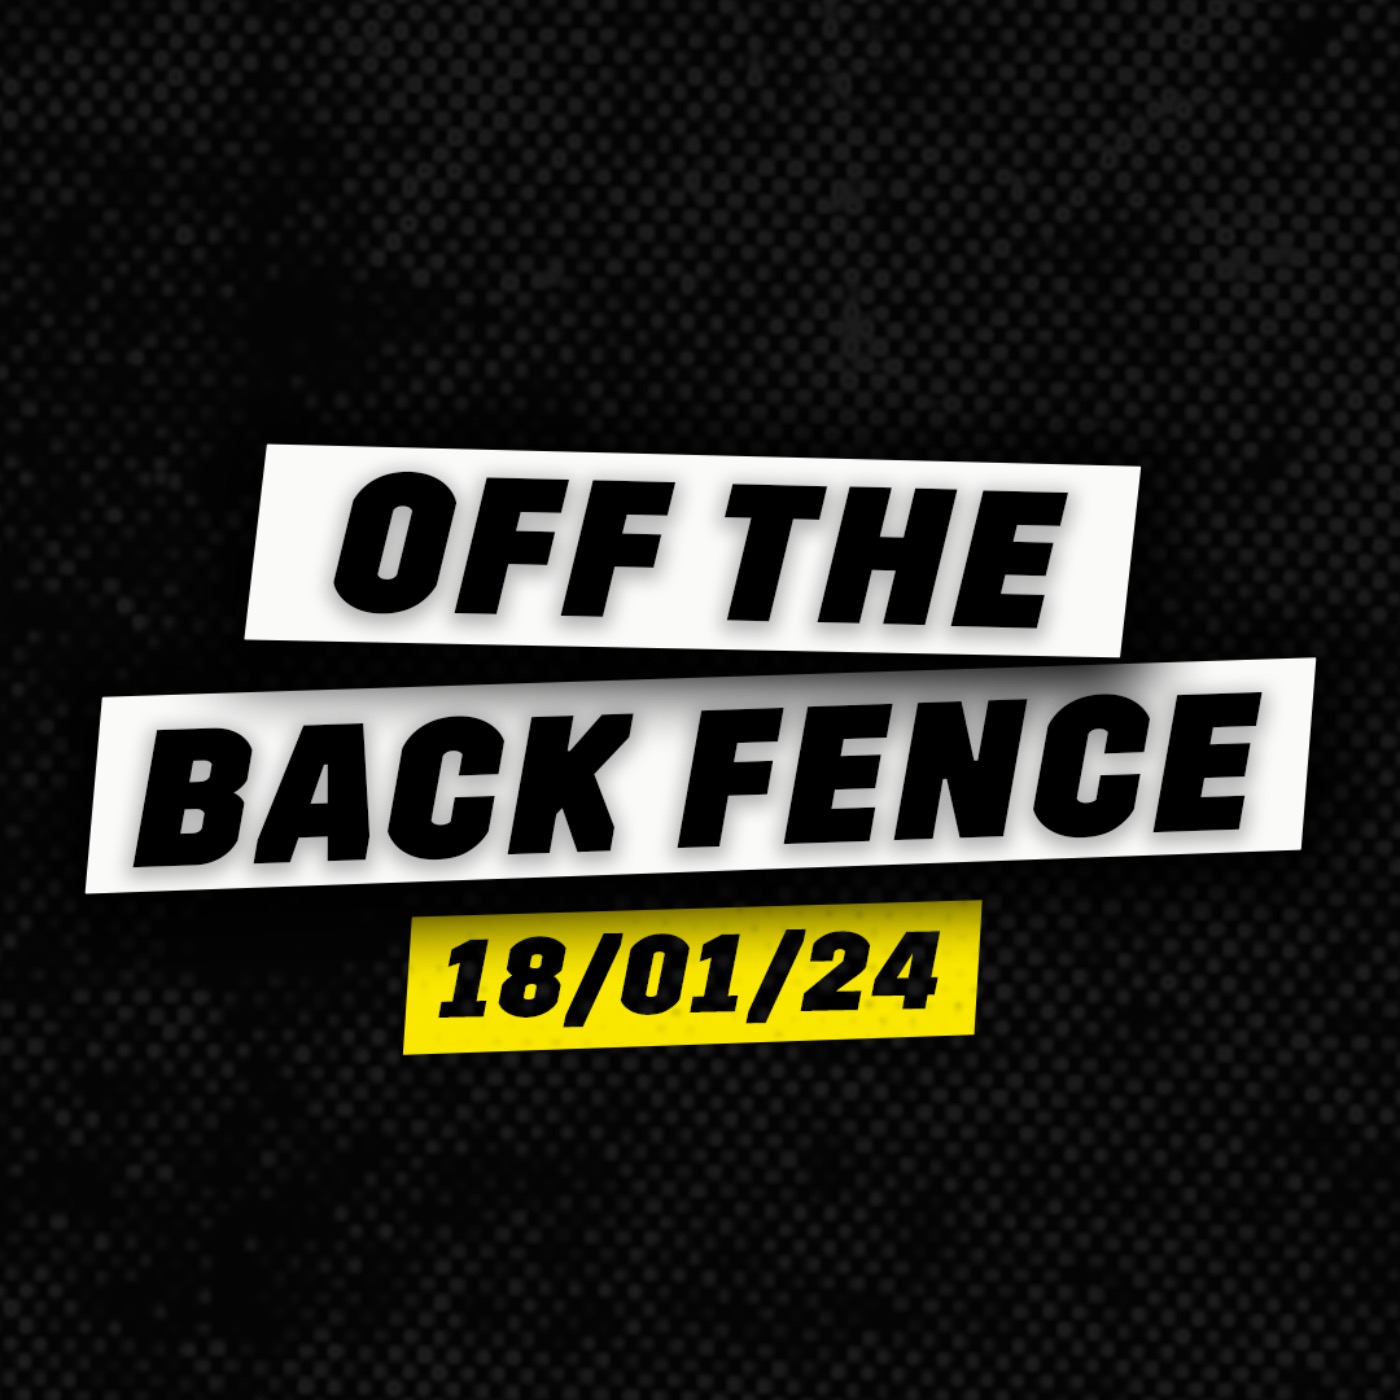 OFF THE BACK FENCE - JAN 18TH